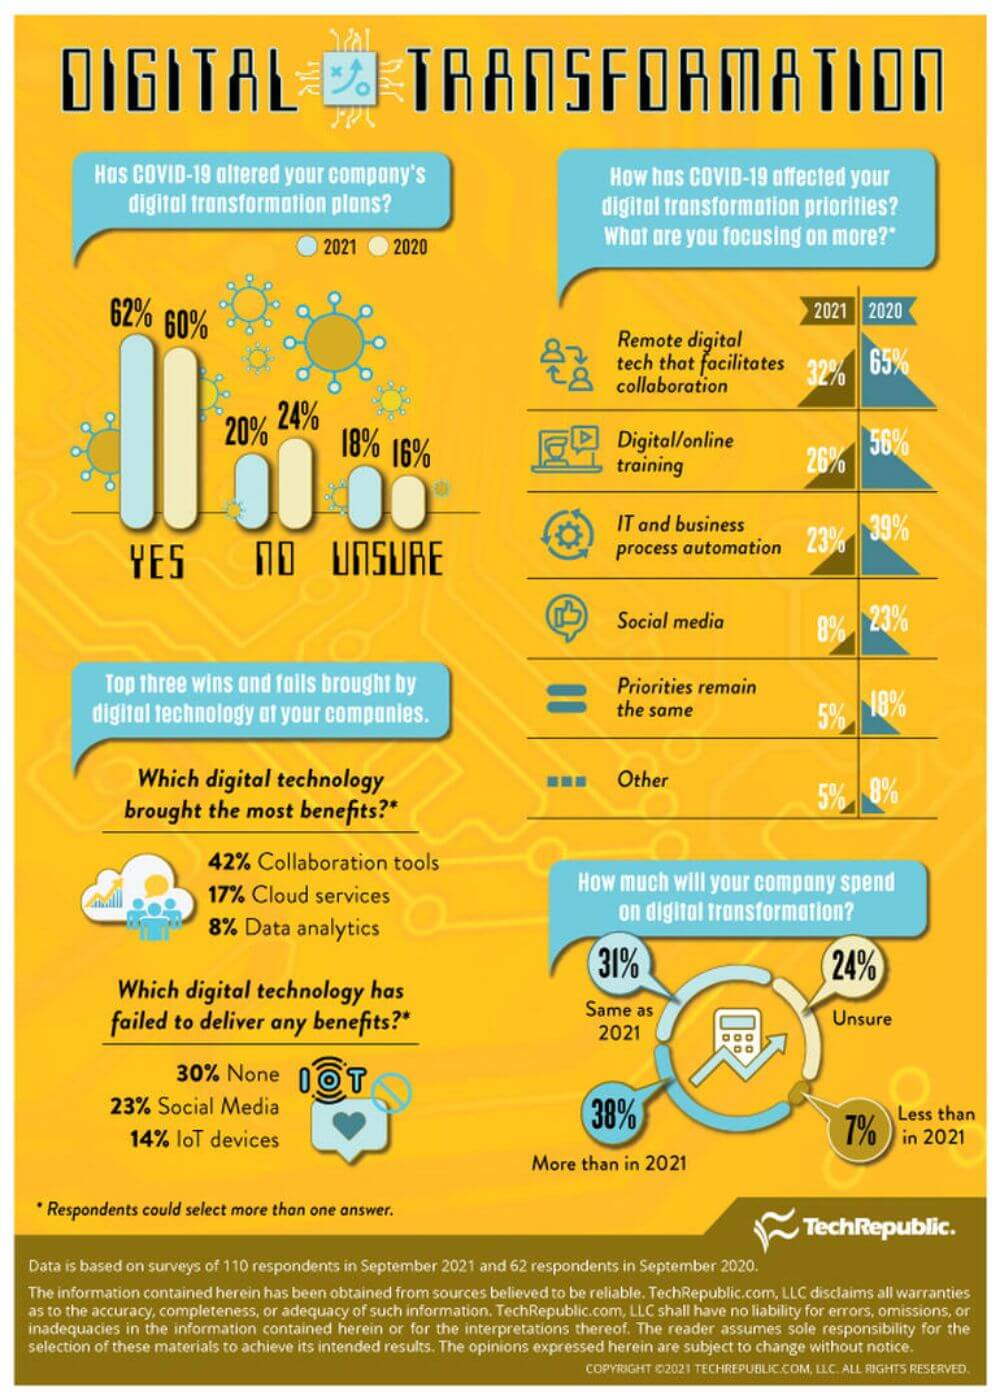 Overview of TechRepublic's Digital Transformation Survey Findings Infographic